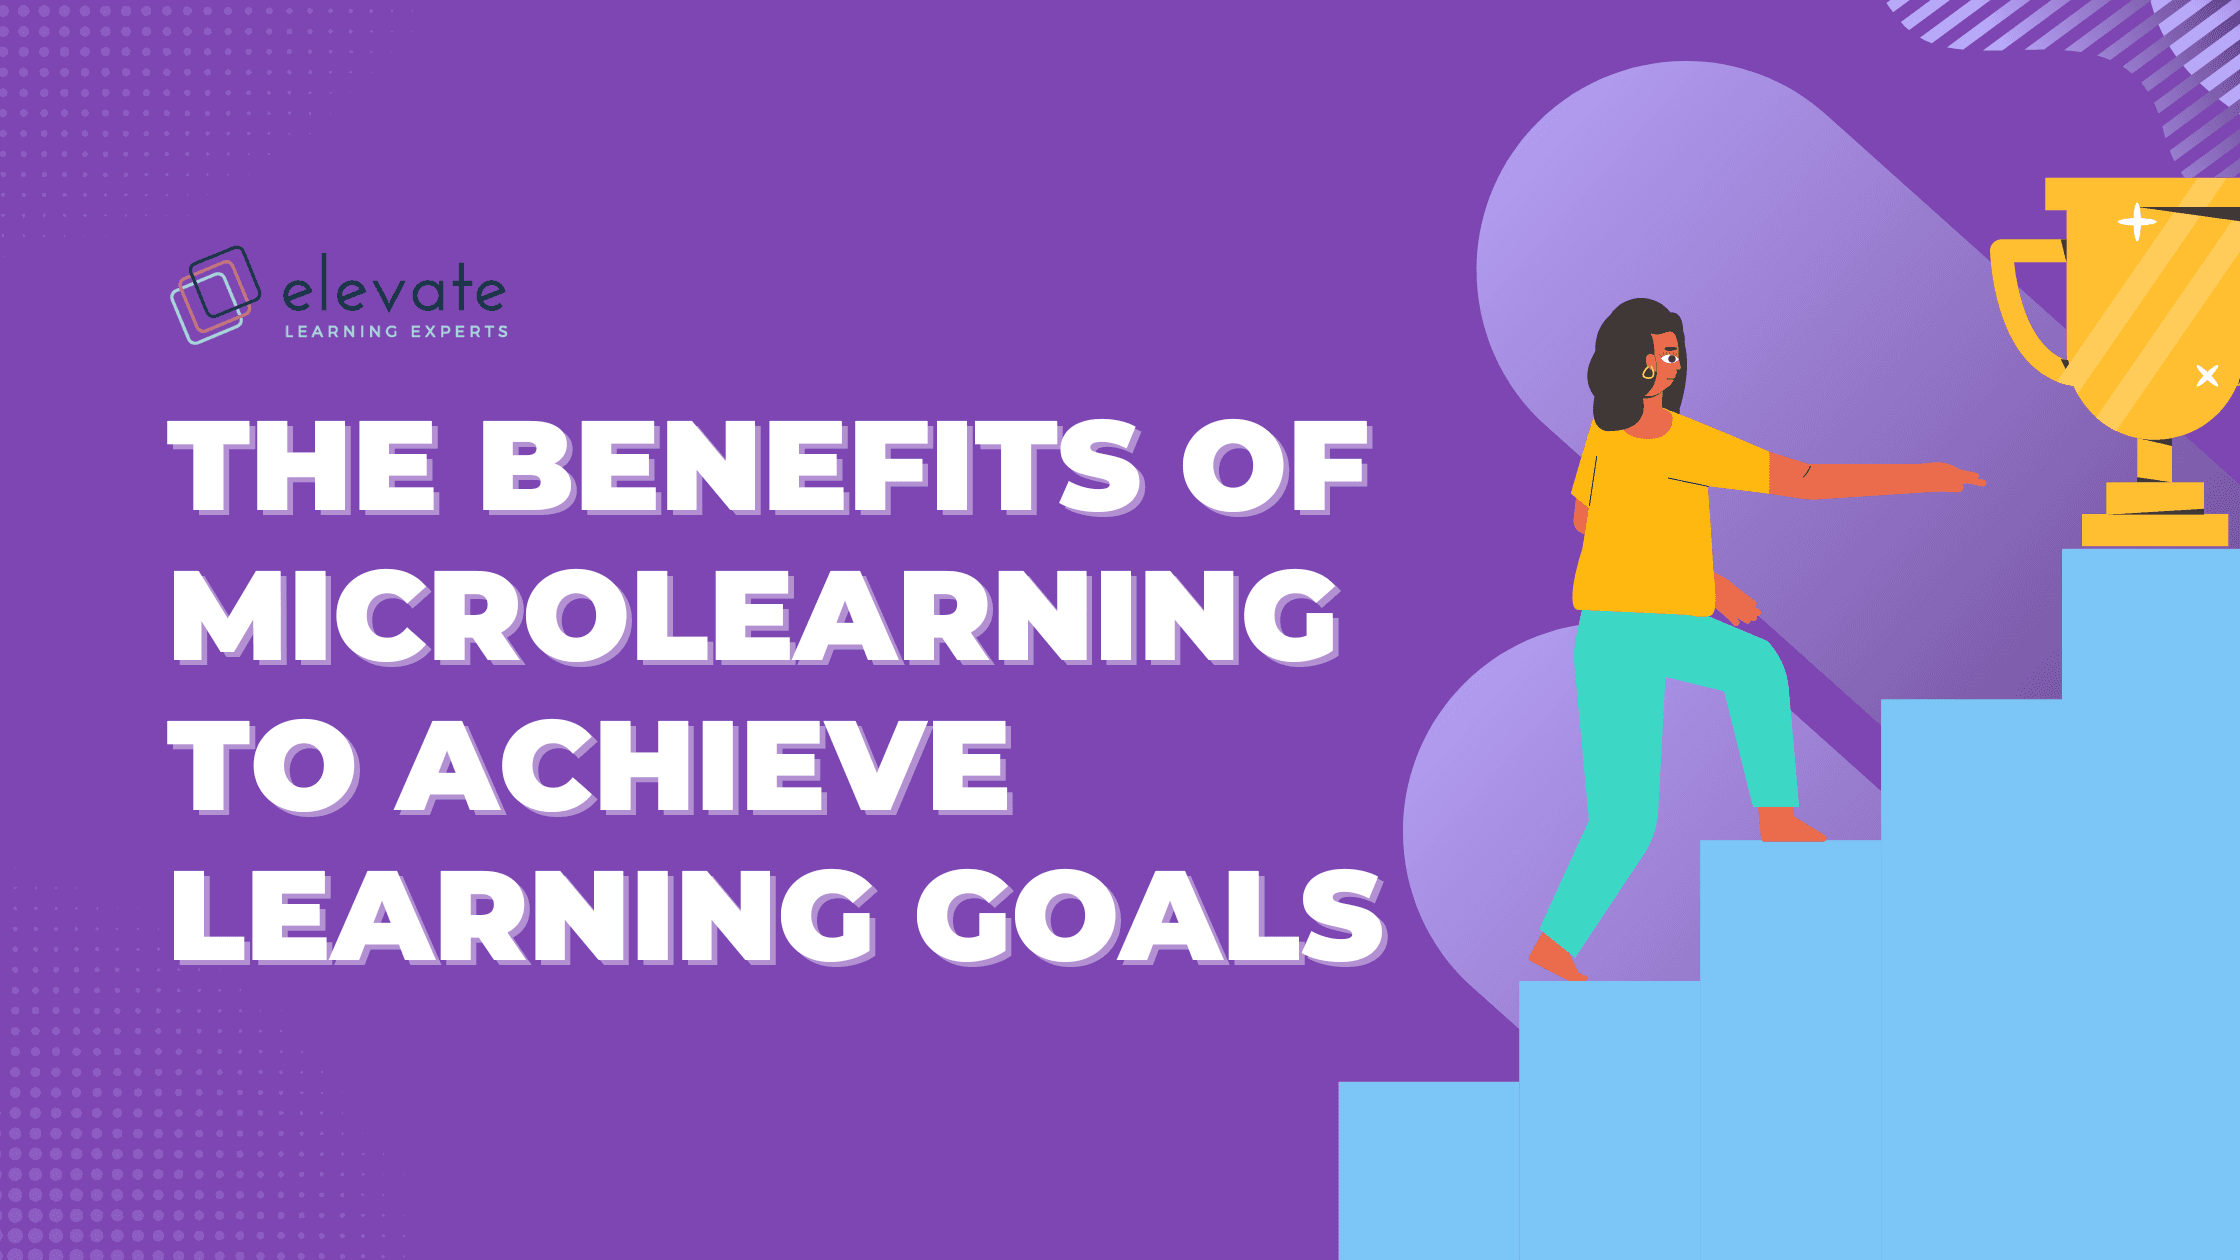 The Benefits of Microlearning to Achieve Learning Goals